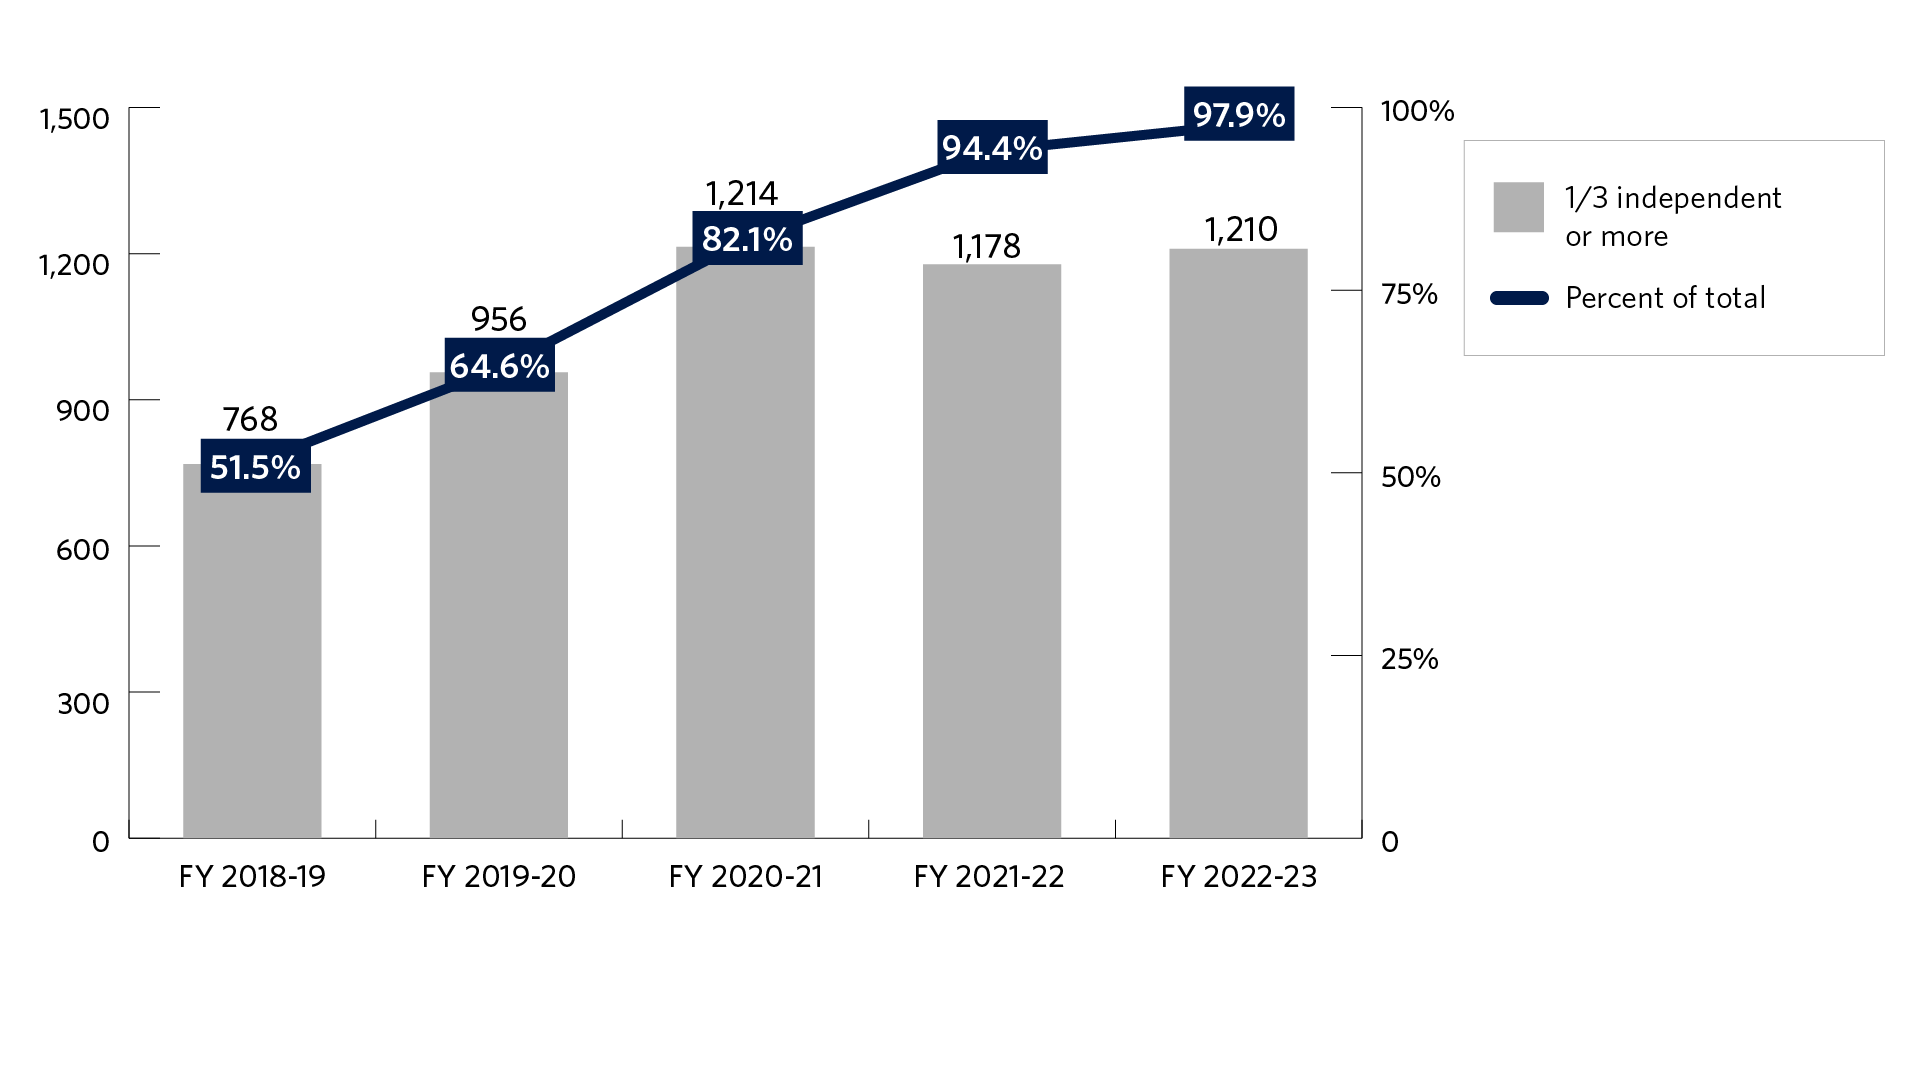 Bar chart of the number and percentage of Japanese companies with at least one-third independent boards in the Tokyo Stock Exchange 1st Section from fiscal year 2018-19 to fiscal year 2022-23. The number of Japanese companies with at least one-third independent boards is 768 in fiscal year 2018-19, 956 in fiscal year 2019-20, 1,214 in fiscal year 2020-21, 1,178 in fiscal year 2021-22, 1210 in fiscal year 2022-23. The percentage of Japanese companies with at least one-third independent boards in the Tokyo Stock Exchange 1st Section is 51.5% in fiscal year 2018-19, 64.6% in fiscal year 2019-20, 82.1% in fiscal year 2020-21, 94.4% in fiscal year 2021-22, and 97.9% in fiscal year 2022-23.